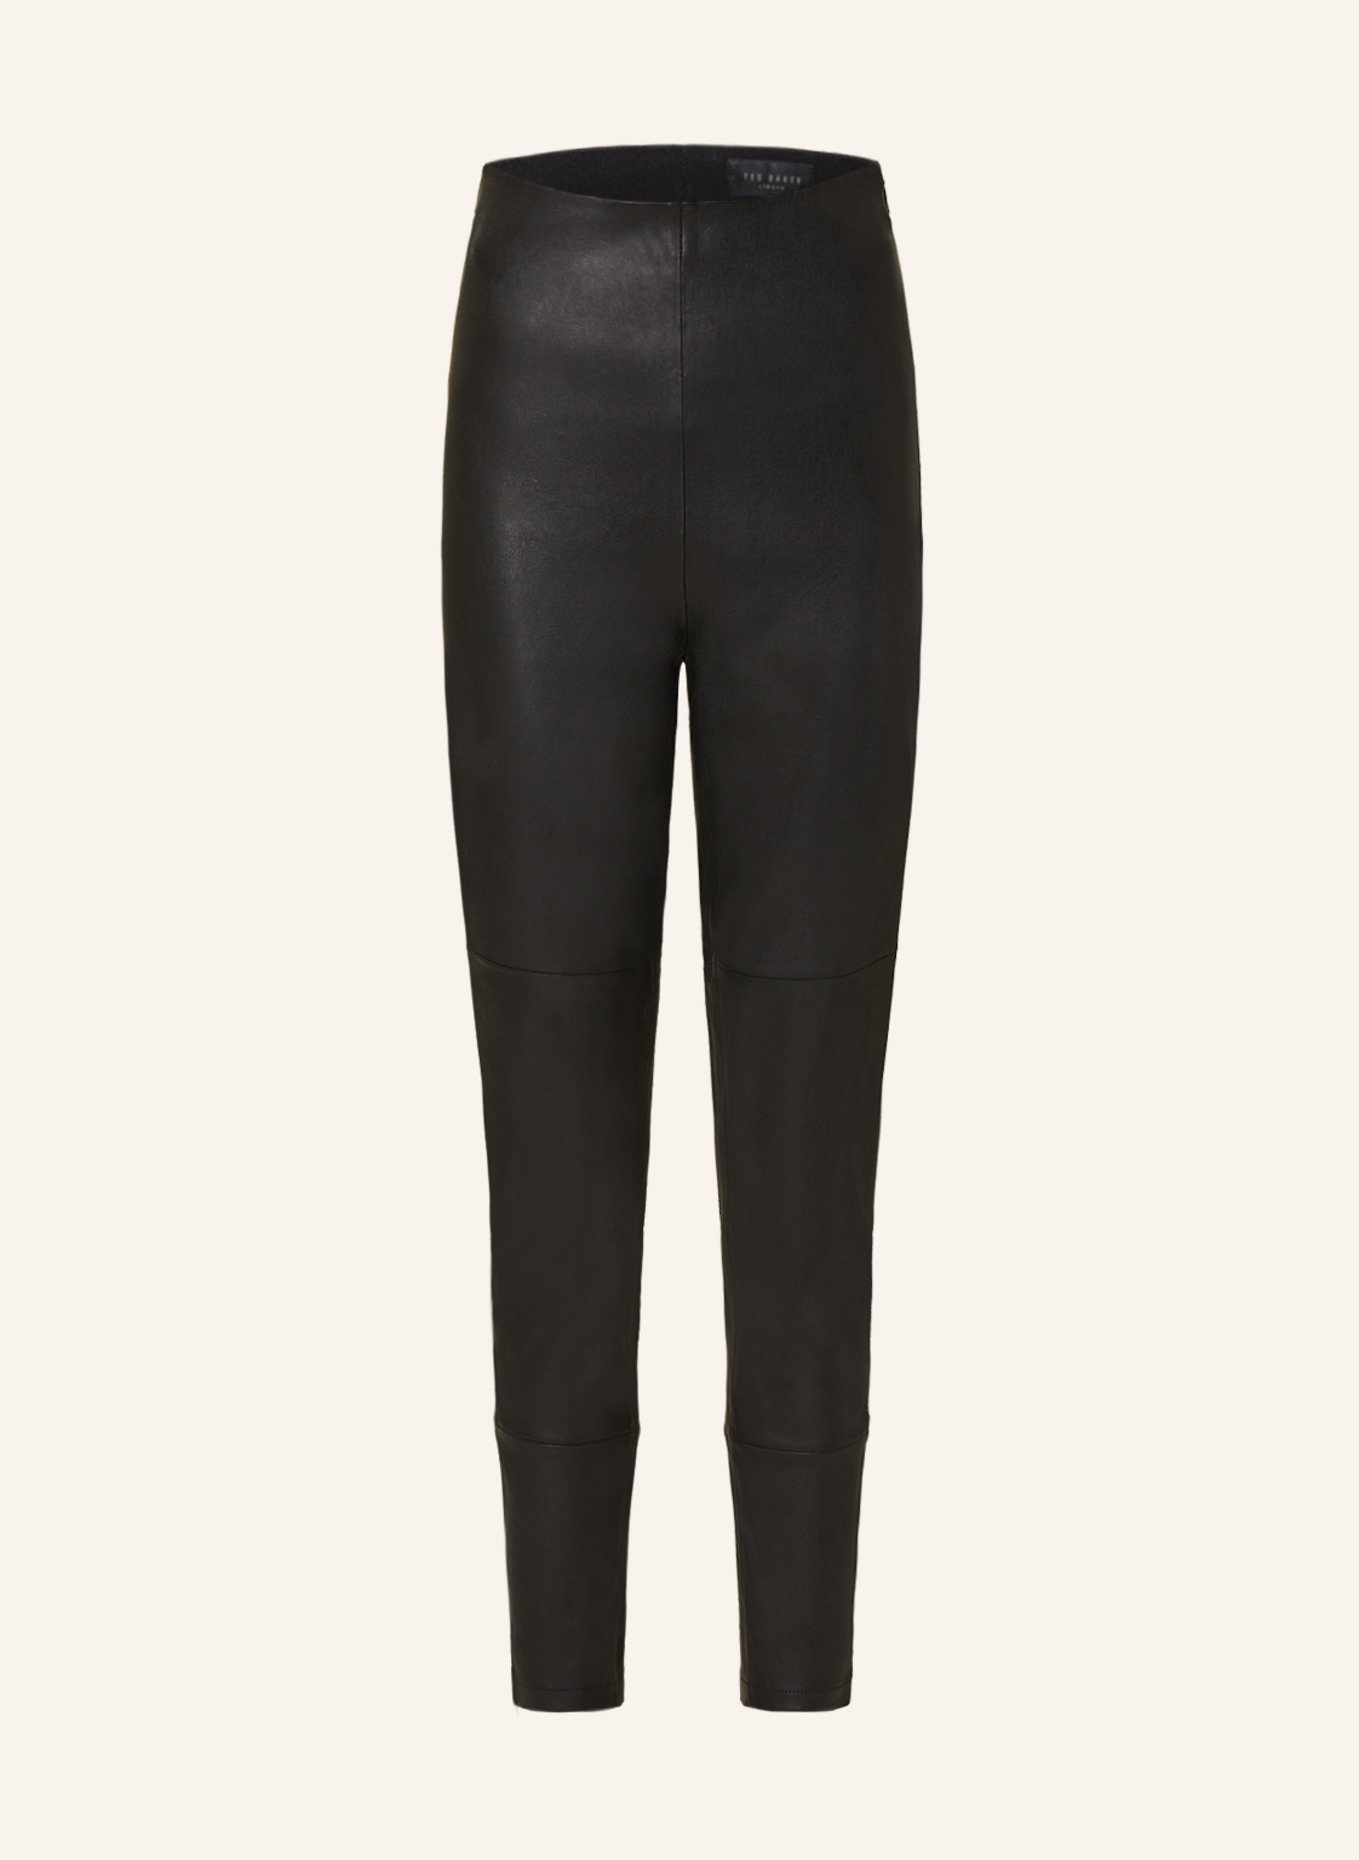 Buy Ted Baker Blue Liroi High Waisted Leggings with Faux Popper Details  from the Next UK online shop